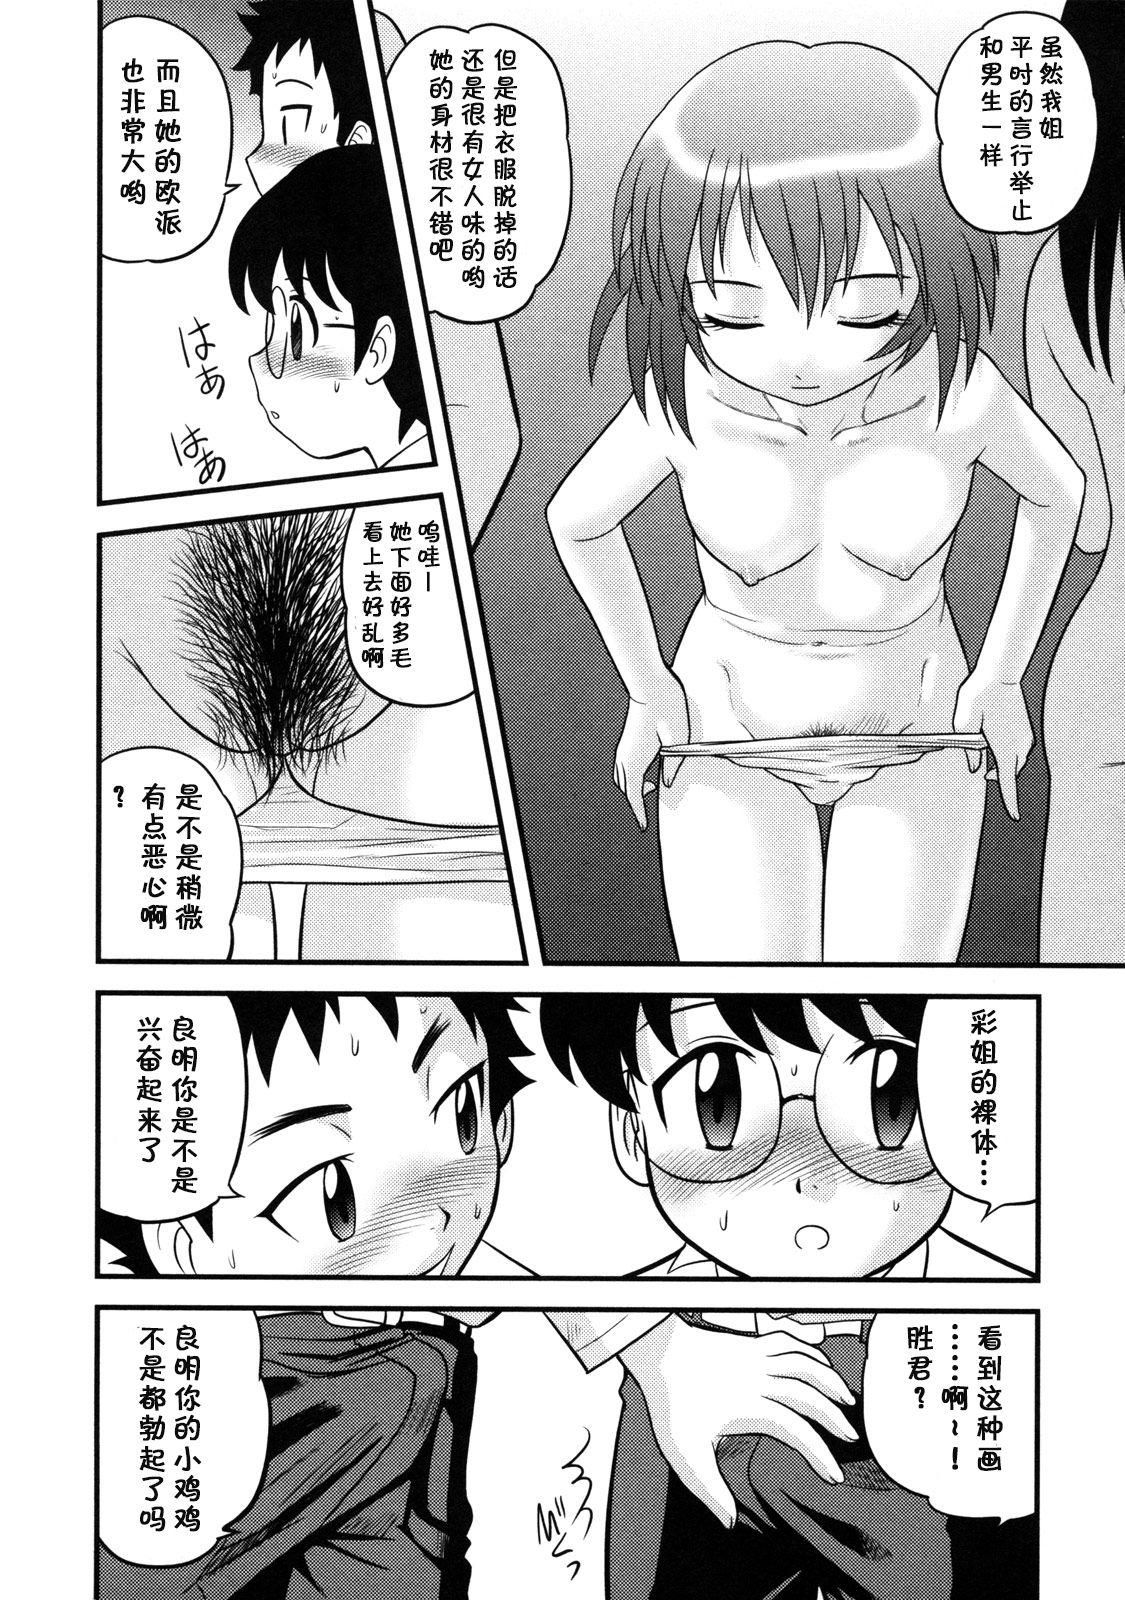 She Tomodachi to Onee-san Strapon - Page 6